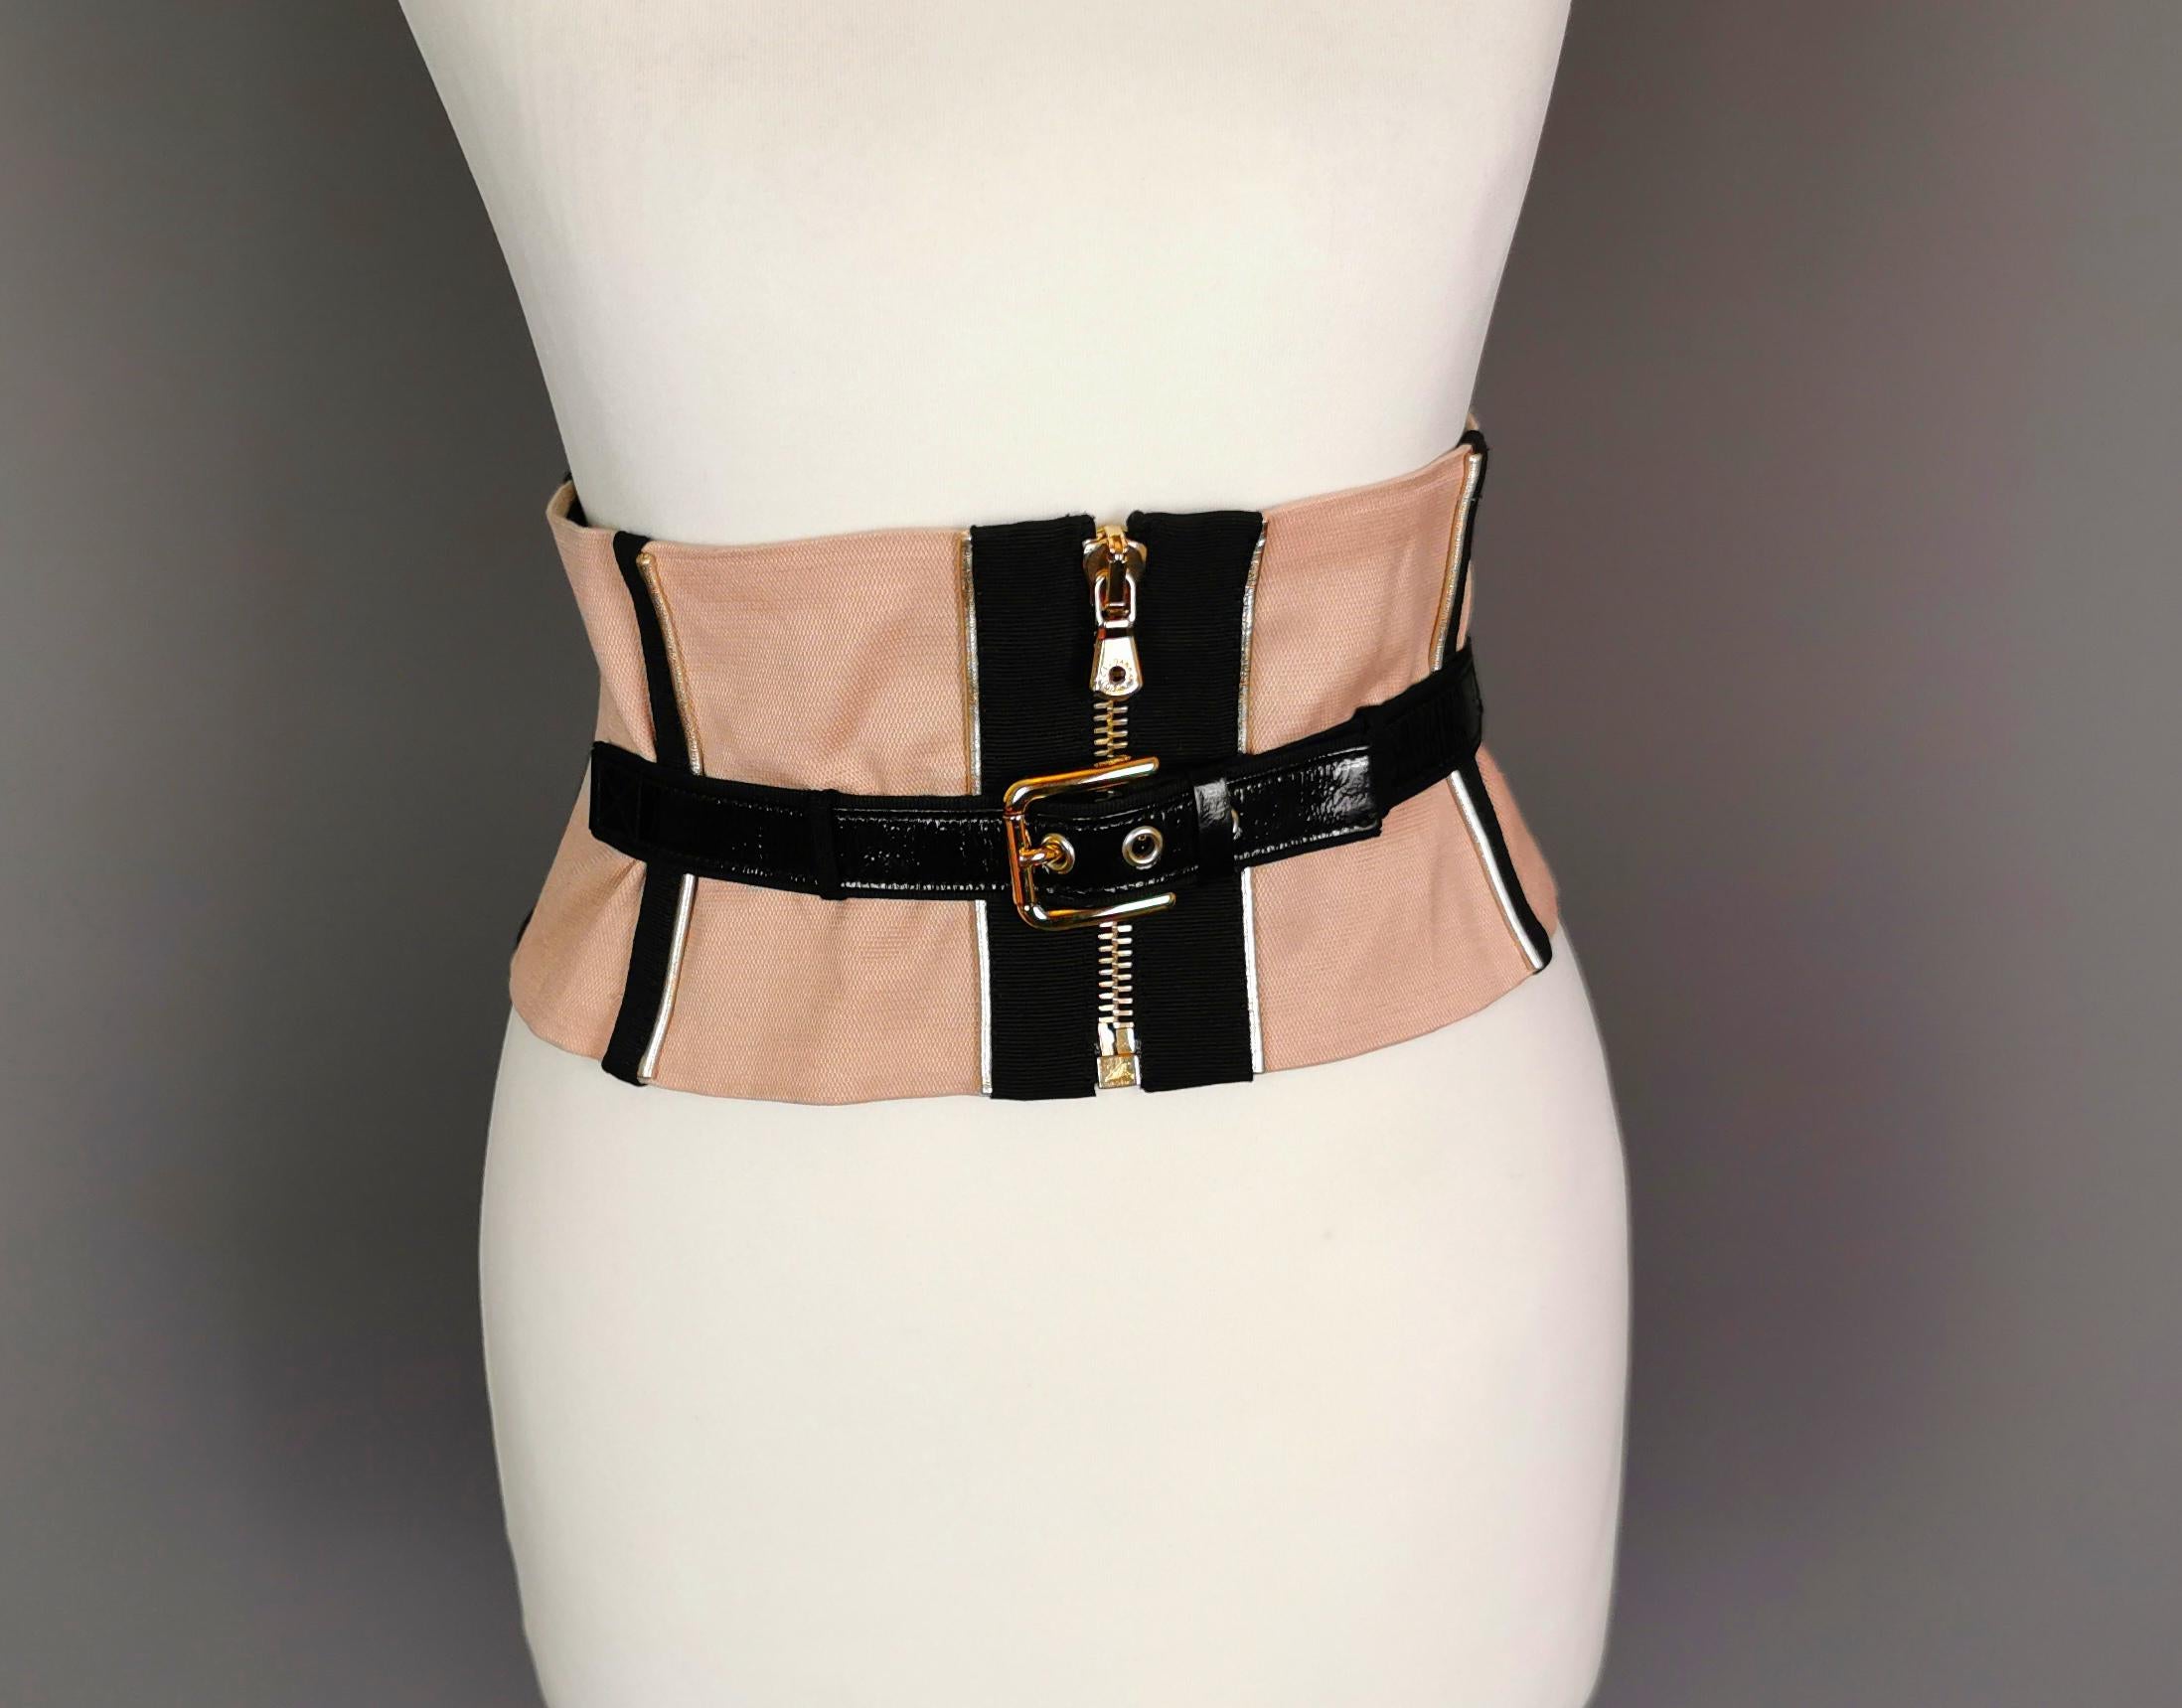 A stunning and iconic corset style waist belt by Dolce and Gabbana.

This belt is one of those pieces that literally turns any outfit into a glam masterpiece in five minutes.

Incredibly well designed, it is finished in a blush pink colour with inky